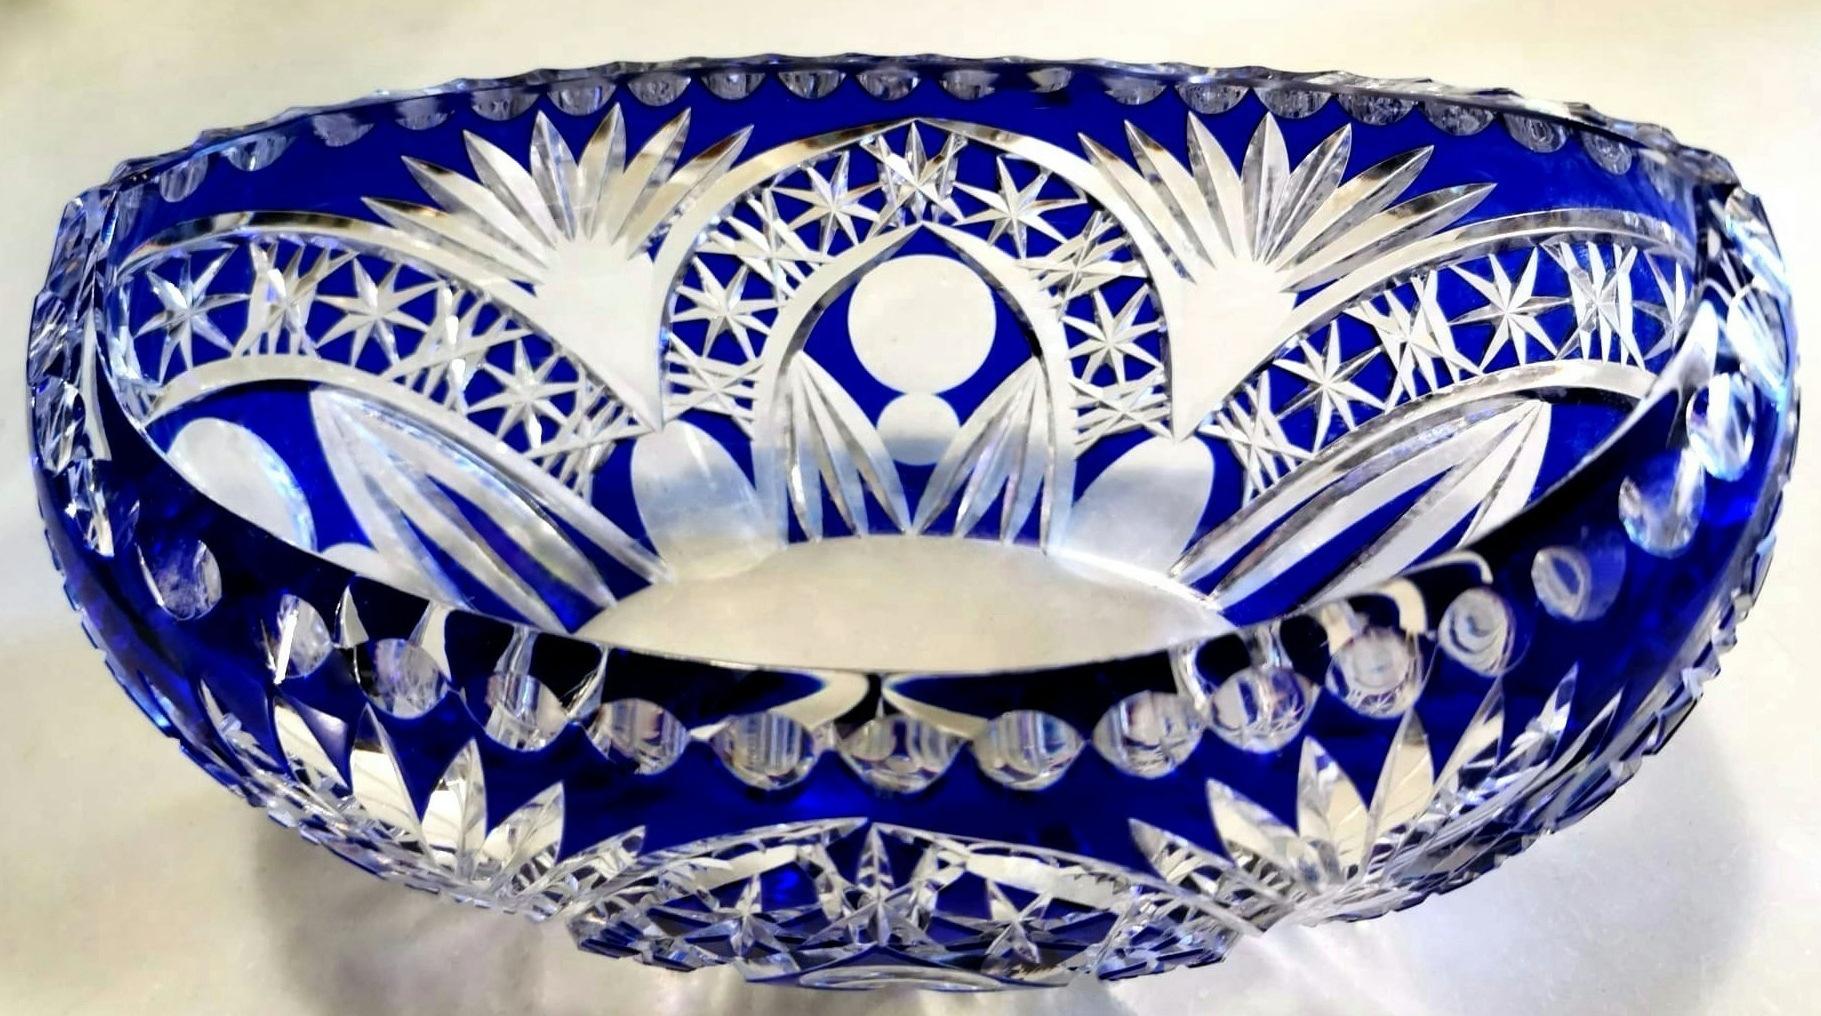 We kindly suggest you read the whole description, because with it we try to give you detailed technical and historical information to guarantee the authenticity of our objects.
Beautiful and particular blue crystal bowl; made between 1950 and 1953